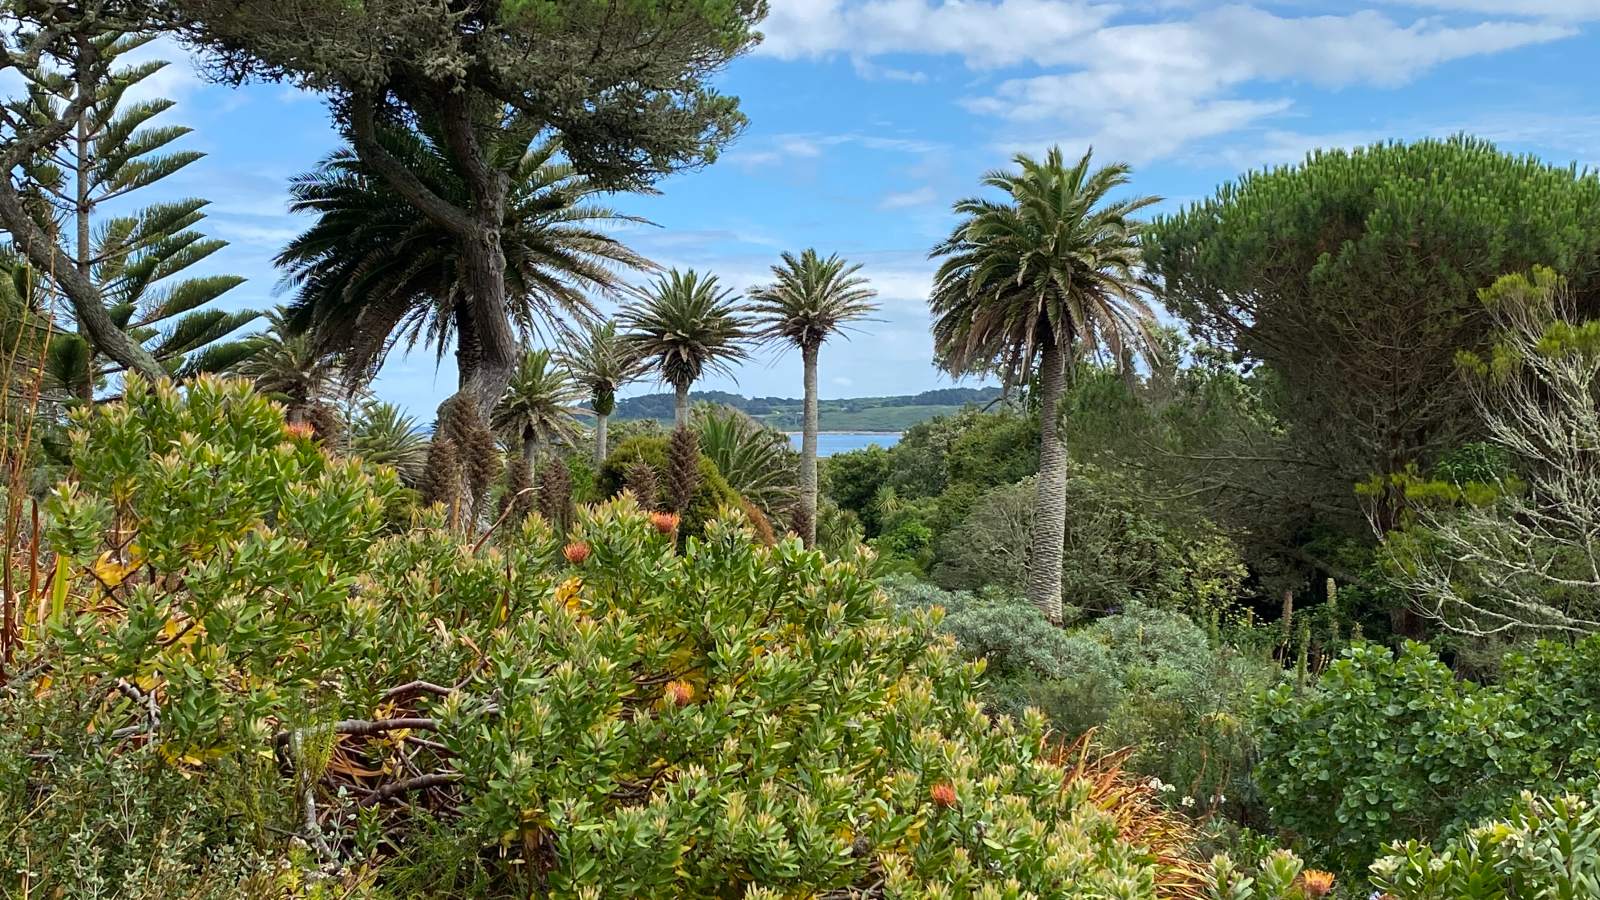 Palm trees overlooking the sea on Tresco, Isles of Scilly